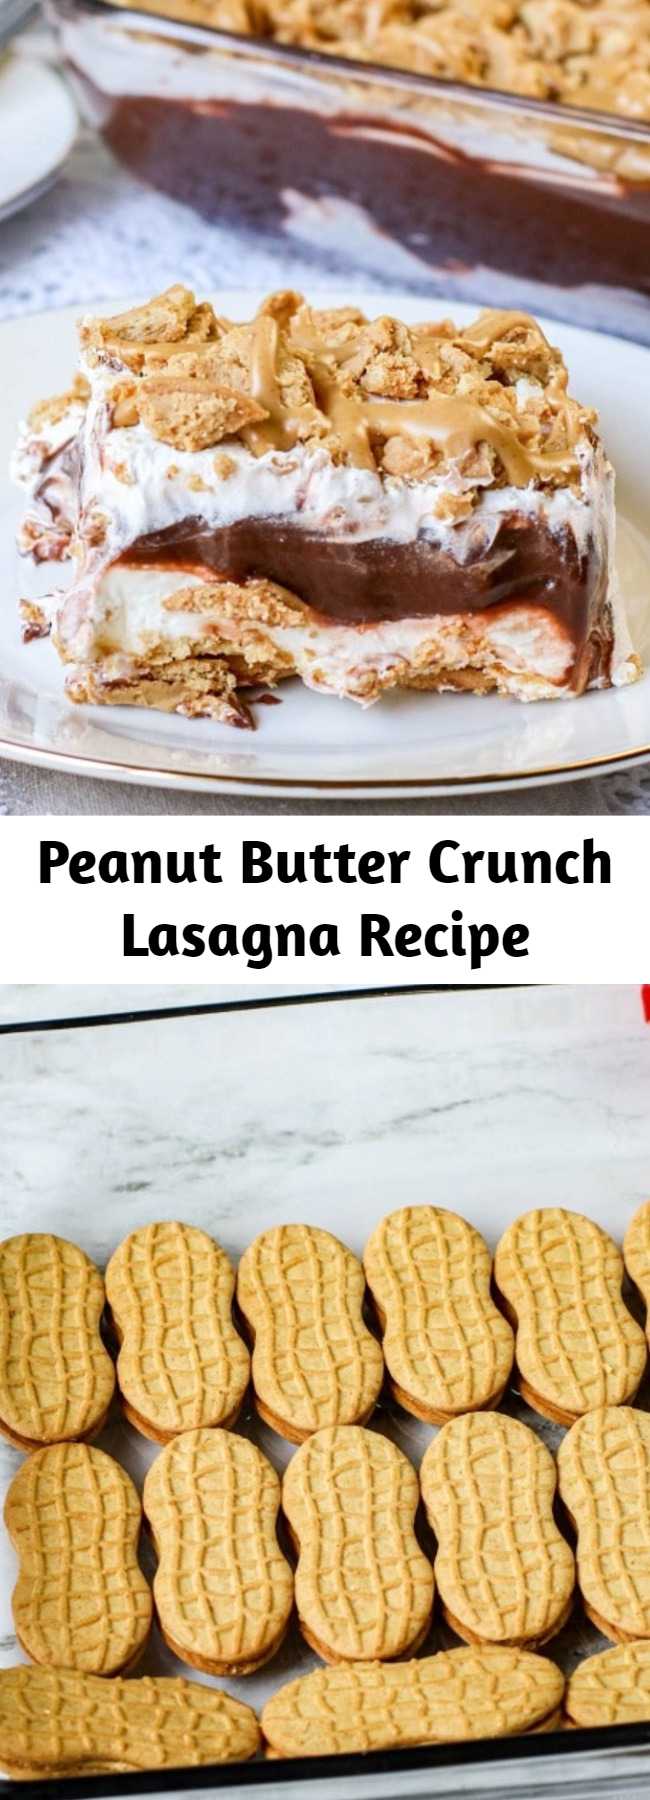 Peanut Butter Crunch Lasagna Recipe - Easy yummy dessert to make for parties or potlucks! Crunchy peanut butter nutter butter cookies make this amazing.